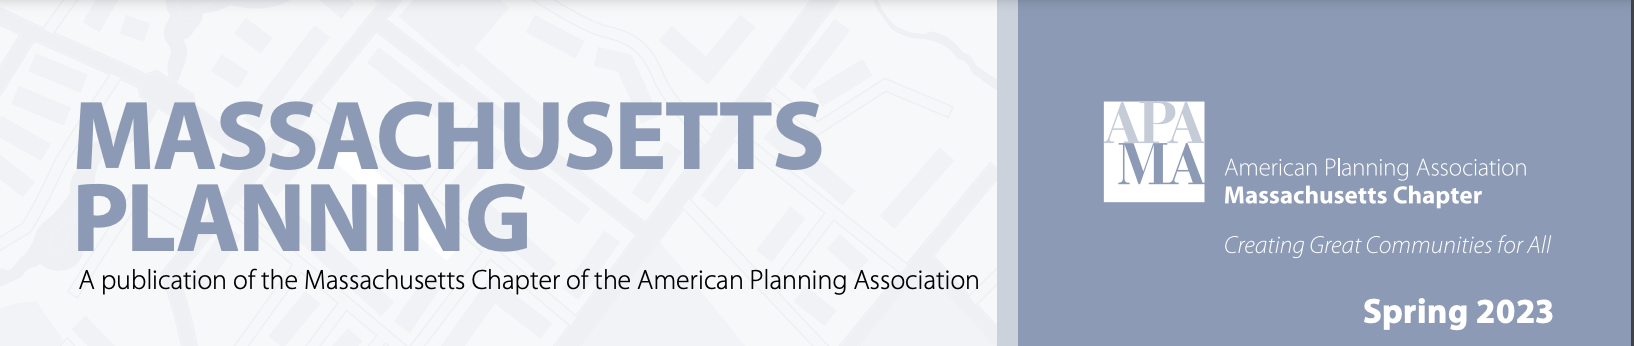 MASSACHUSETTS PLANNING A publication of the Massachusetts Chapter of the American Planning Association American Planning Association Massachusetts Chapter Creating Great Communities for All Spring 2023